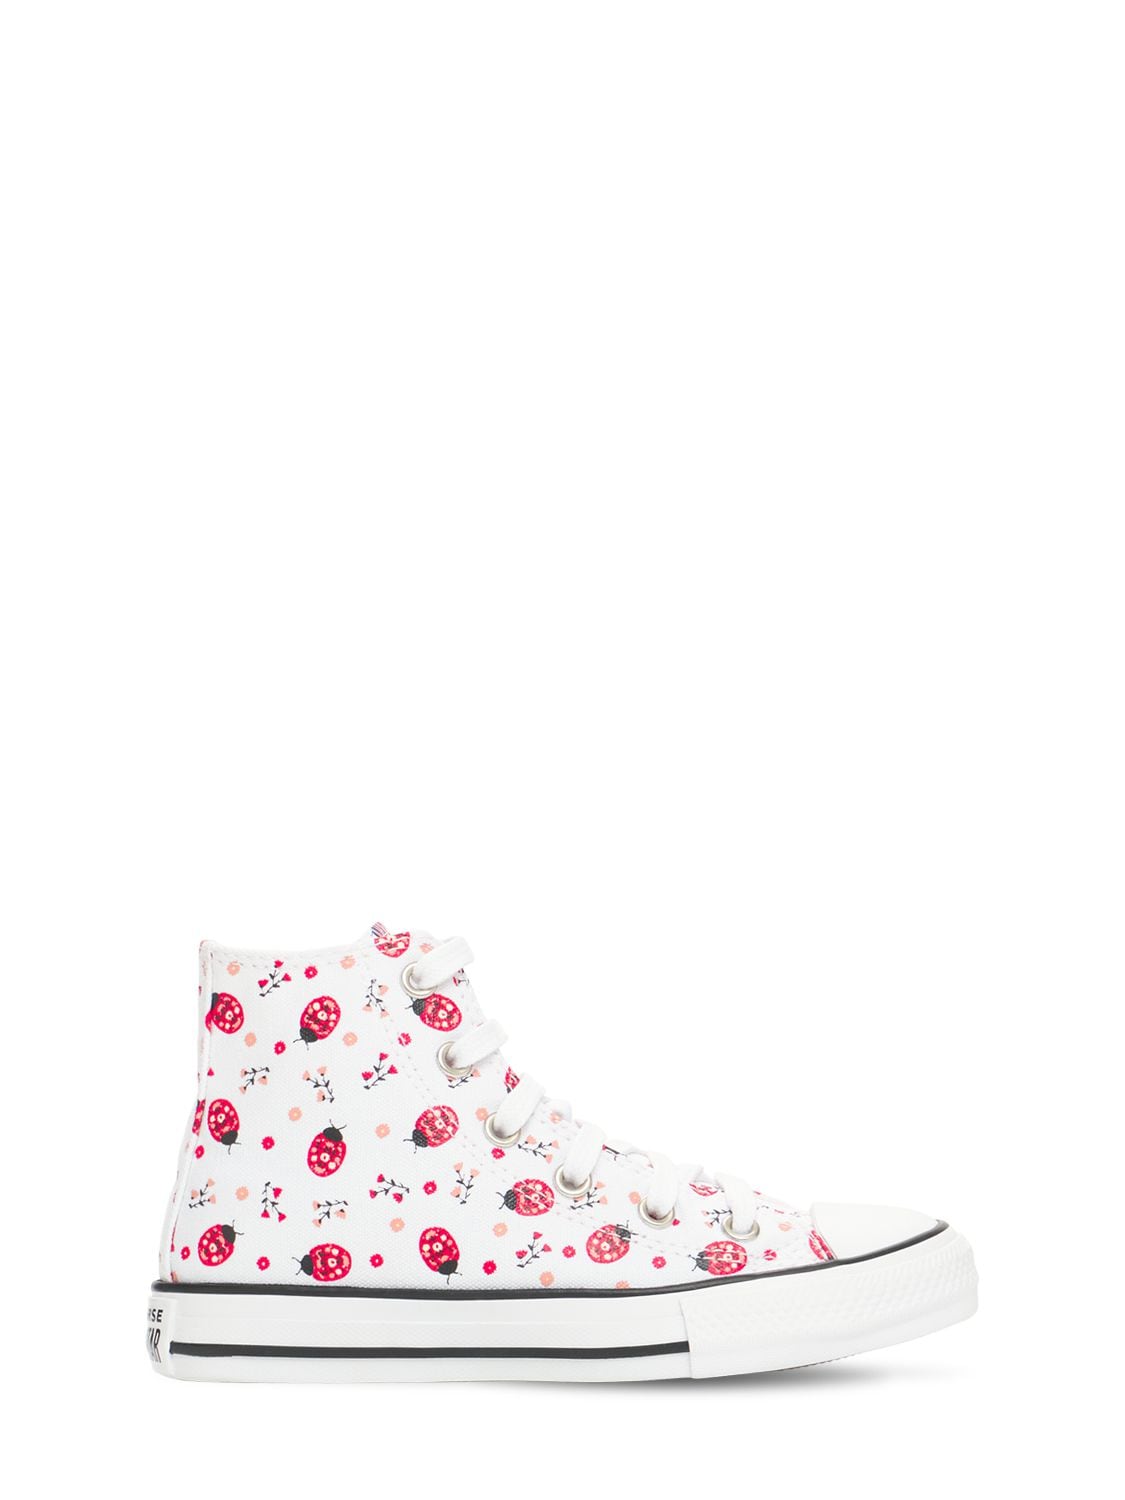 Converse Kids' Ladybug Chuck Taylor All Star Trainers In White/red/black